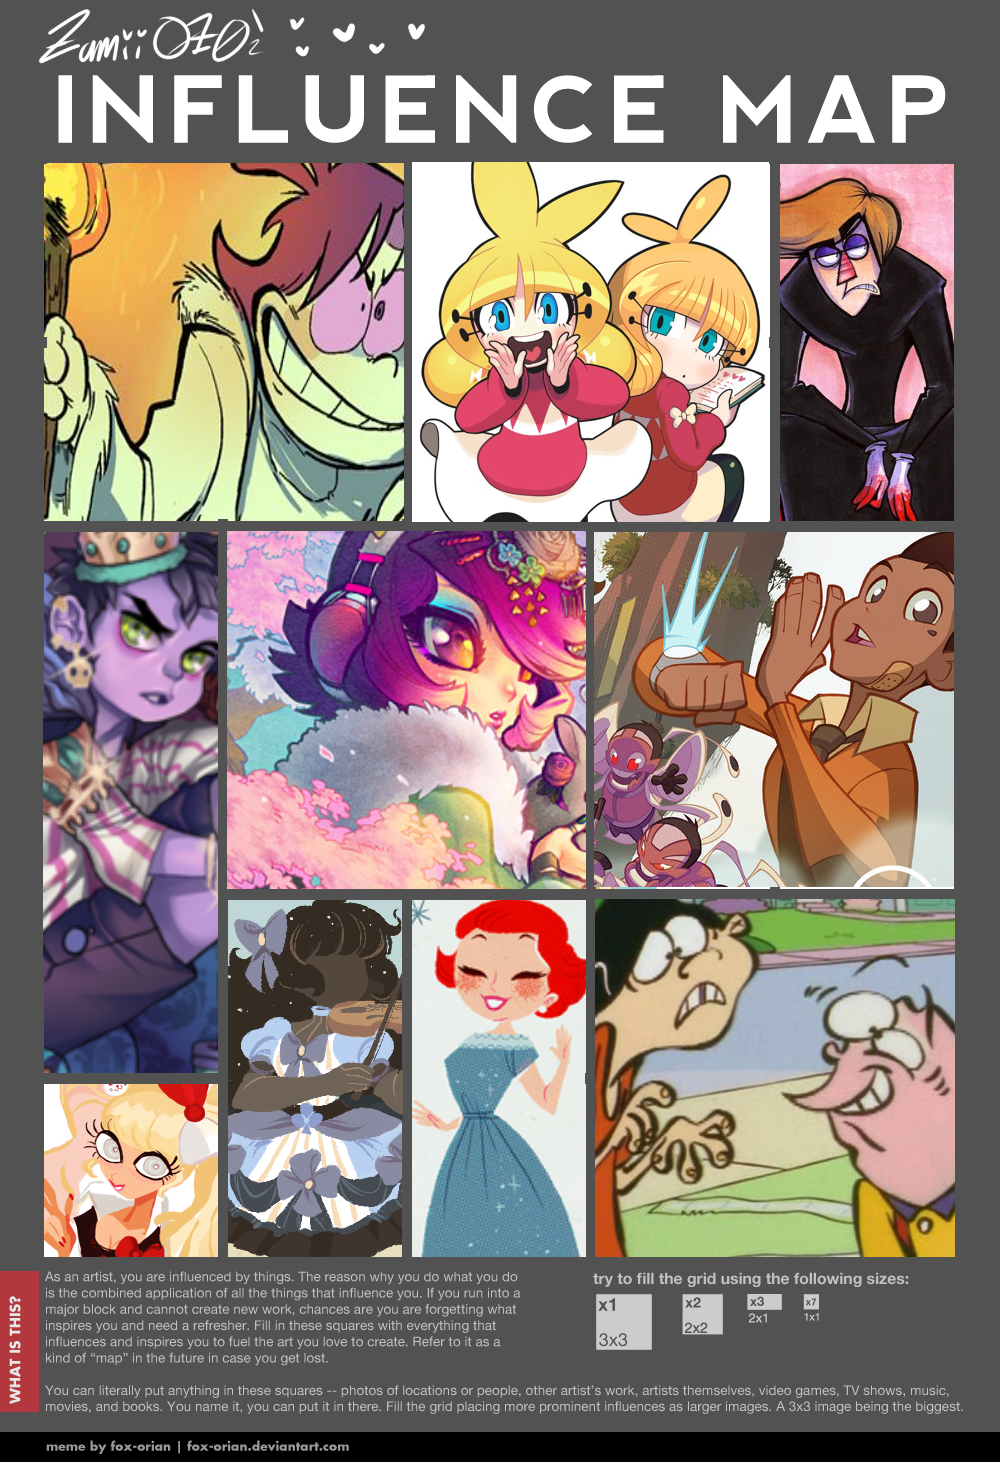 i re did my influence map cuz my influences have changed since i last did one yeeee.
Aisha’s Art is so inspirational because i love the colors and her art style in general, her cartoons are so great and funny!!! She inspires me to be more wacky and...